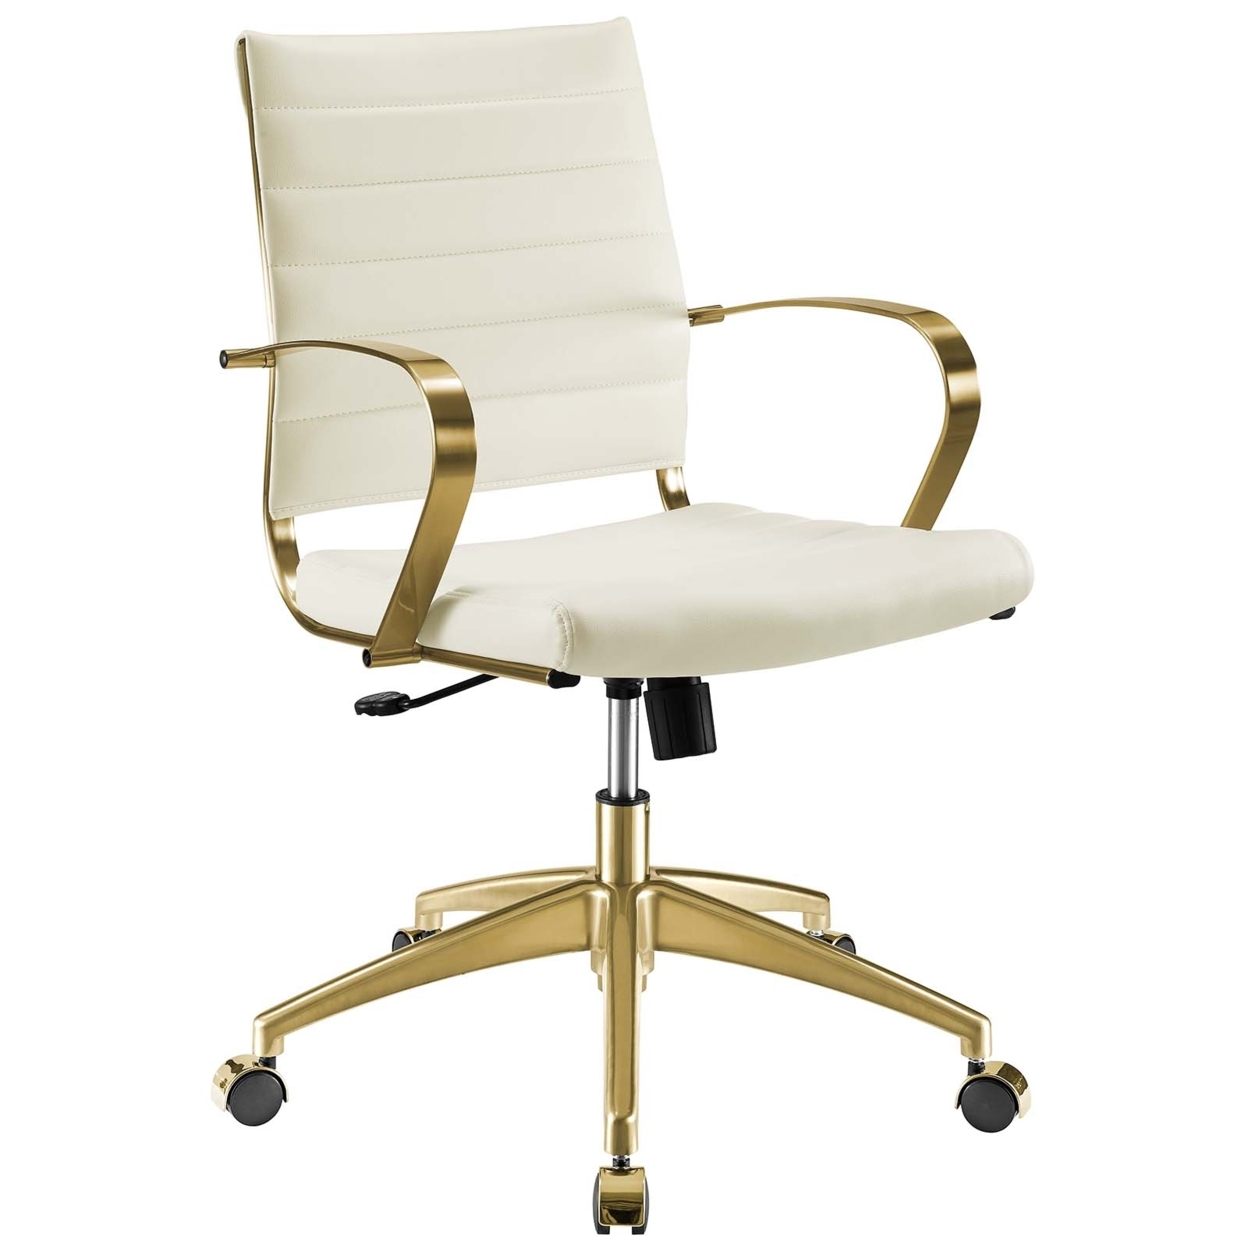 Jive Gold Stainless Steel Midback Office Chair,Gold White